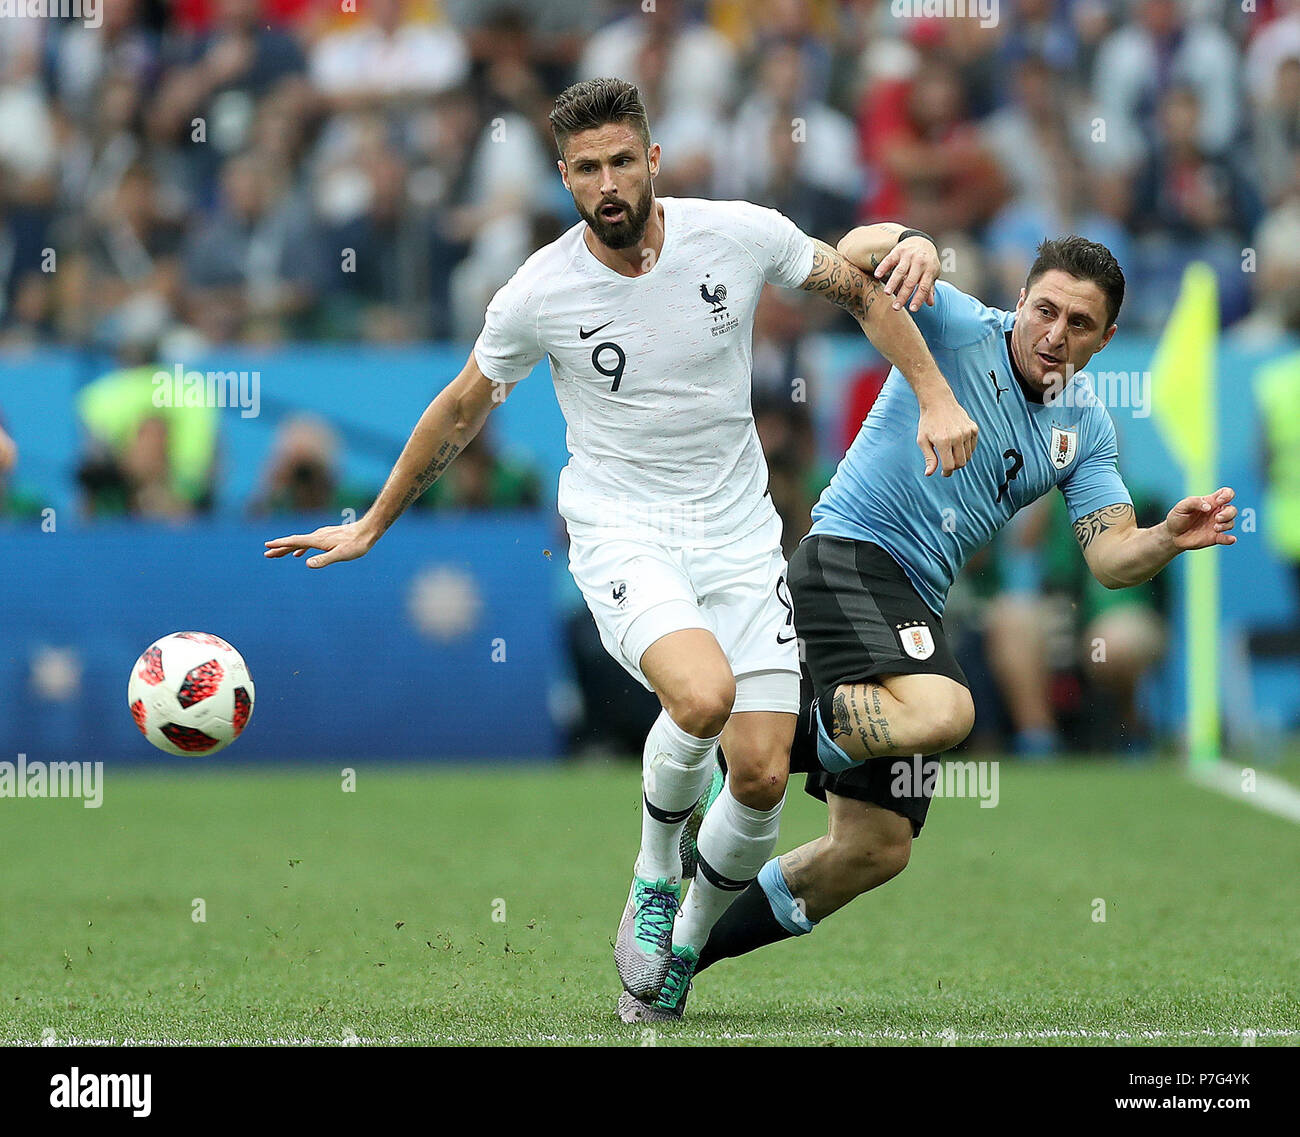 Nizhny Novgorod, Russia. 6th July, 2018. Cristian Rodriguez (R) of Uruguay vies with Olivier Giroud of France during the 2018 FIFA World Cup quarter-final match between Uruguay and France in Nizhny Novgorod, Russia, July 6, 2018. France won 2-0 and advanced to the semi-finals. Credit: Fei Maohua/Xinhua/Alamy Live News Stock Photo